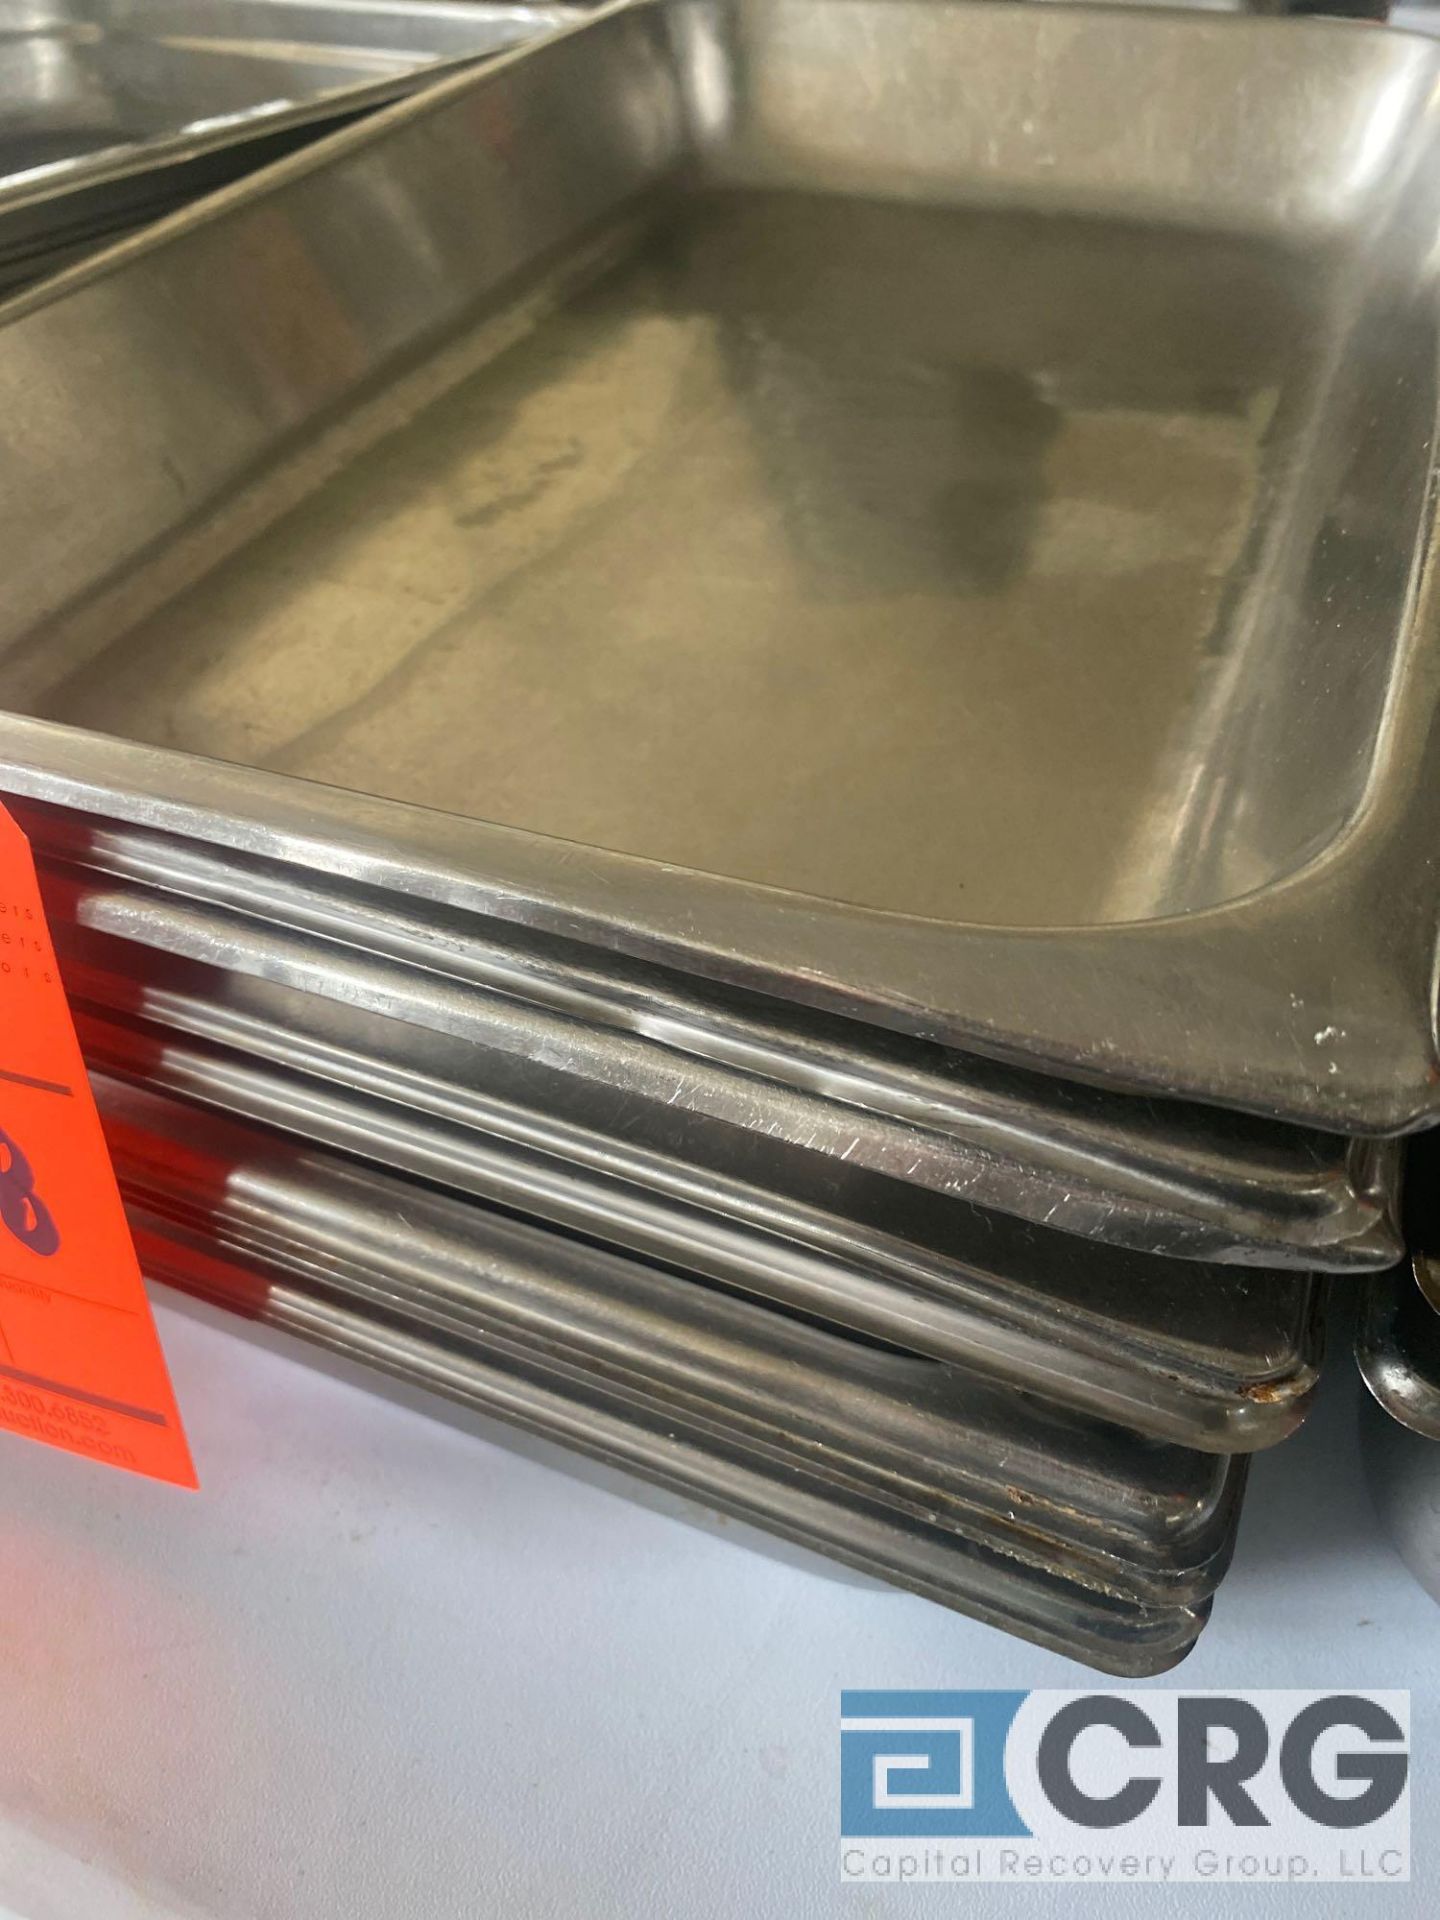 Lot of (18) 21 inch x 12.5 x 2.5 deep stainless steel shallow steam table pans - Image 2 of 4